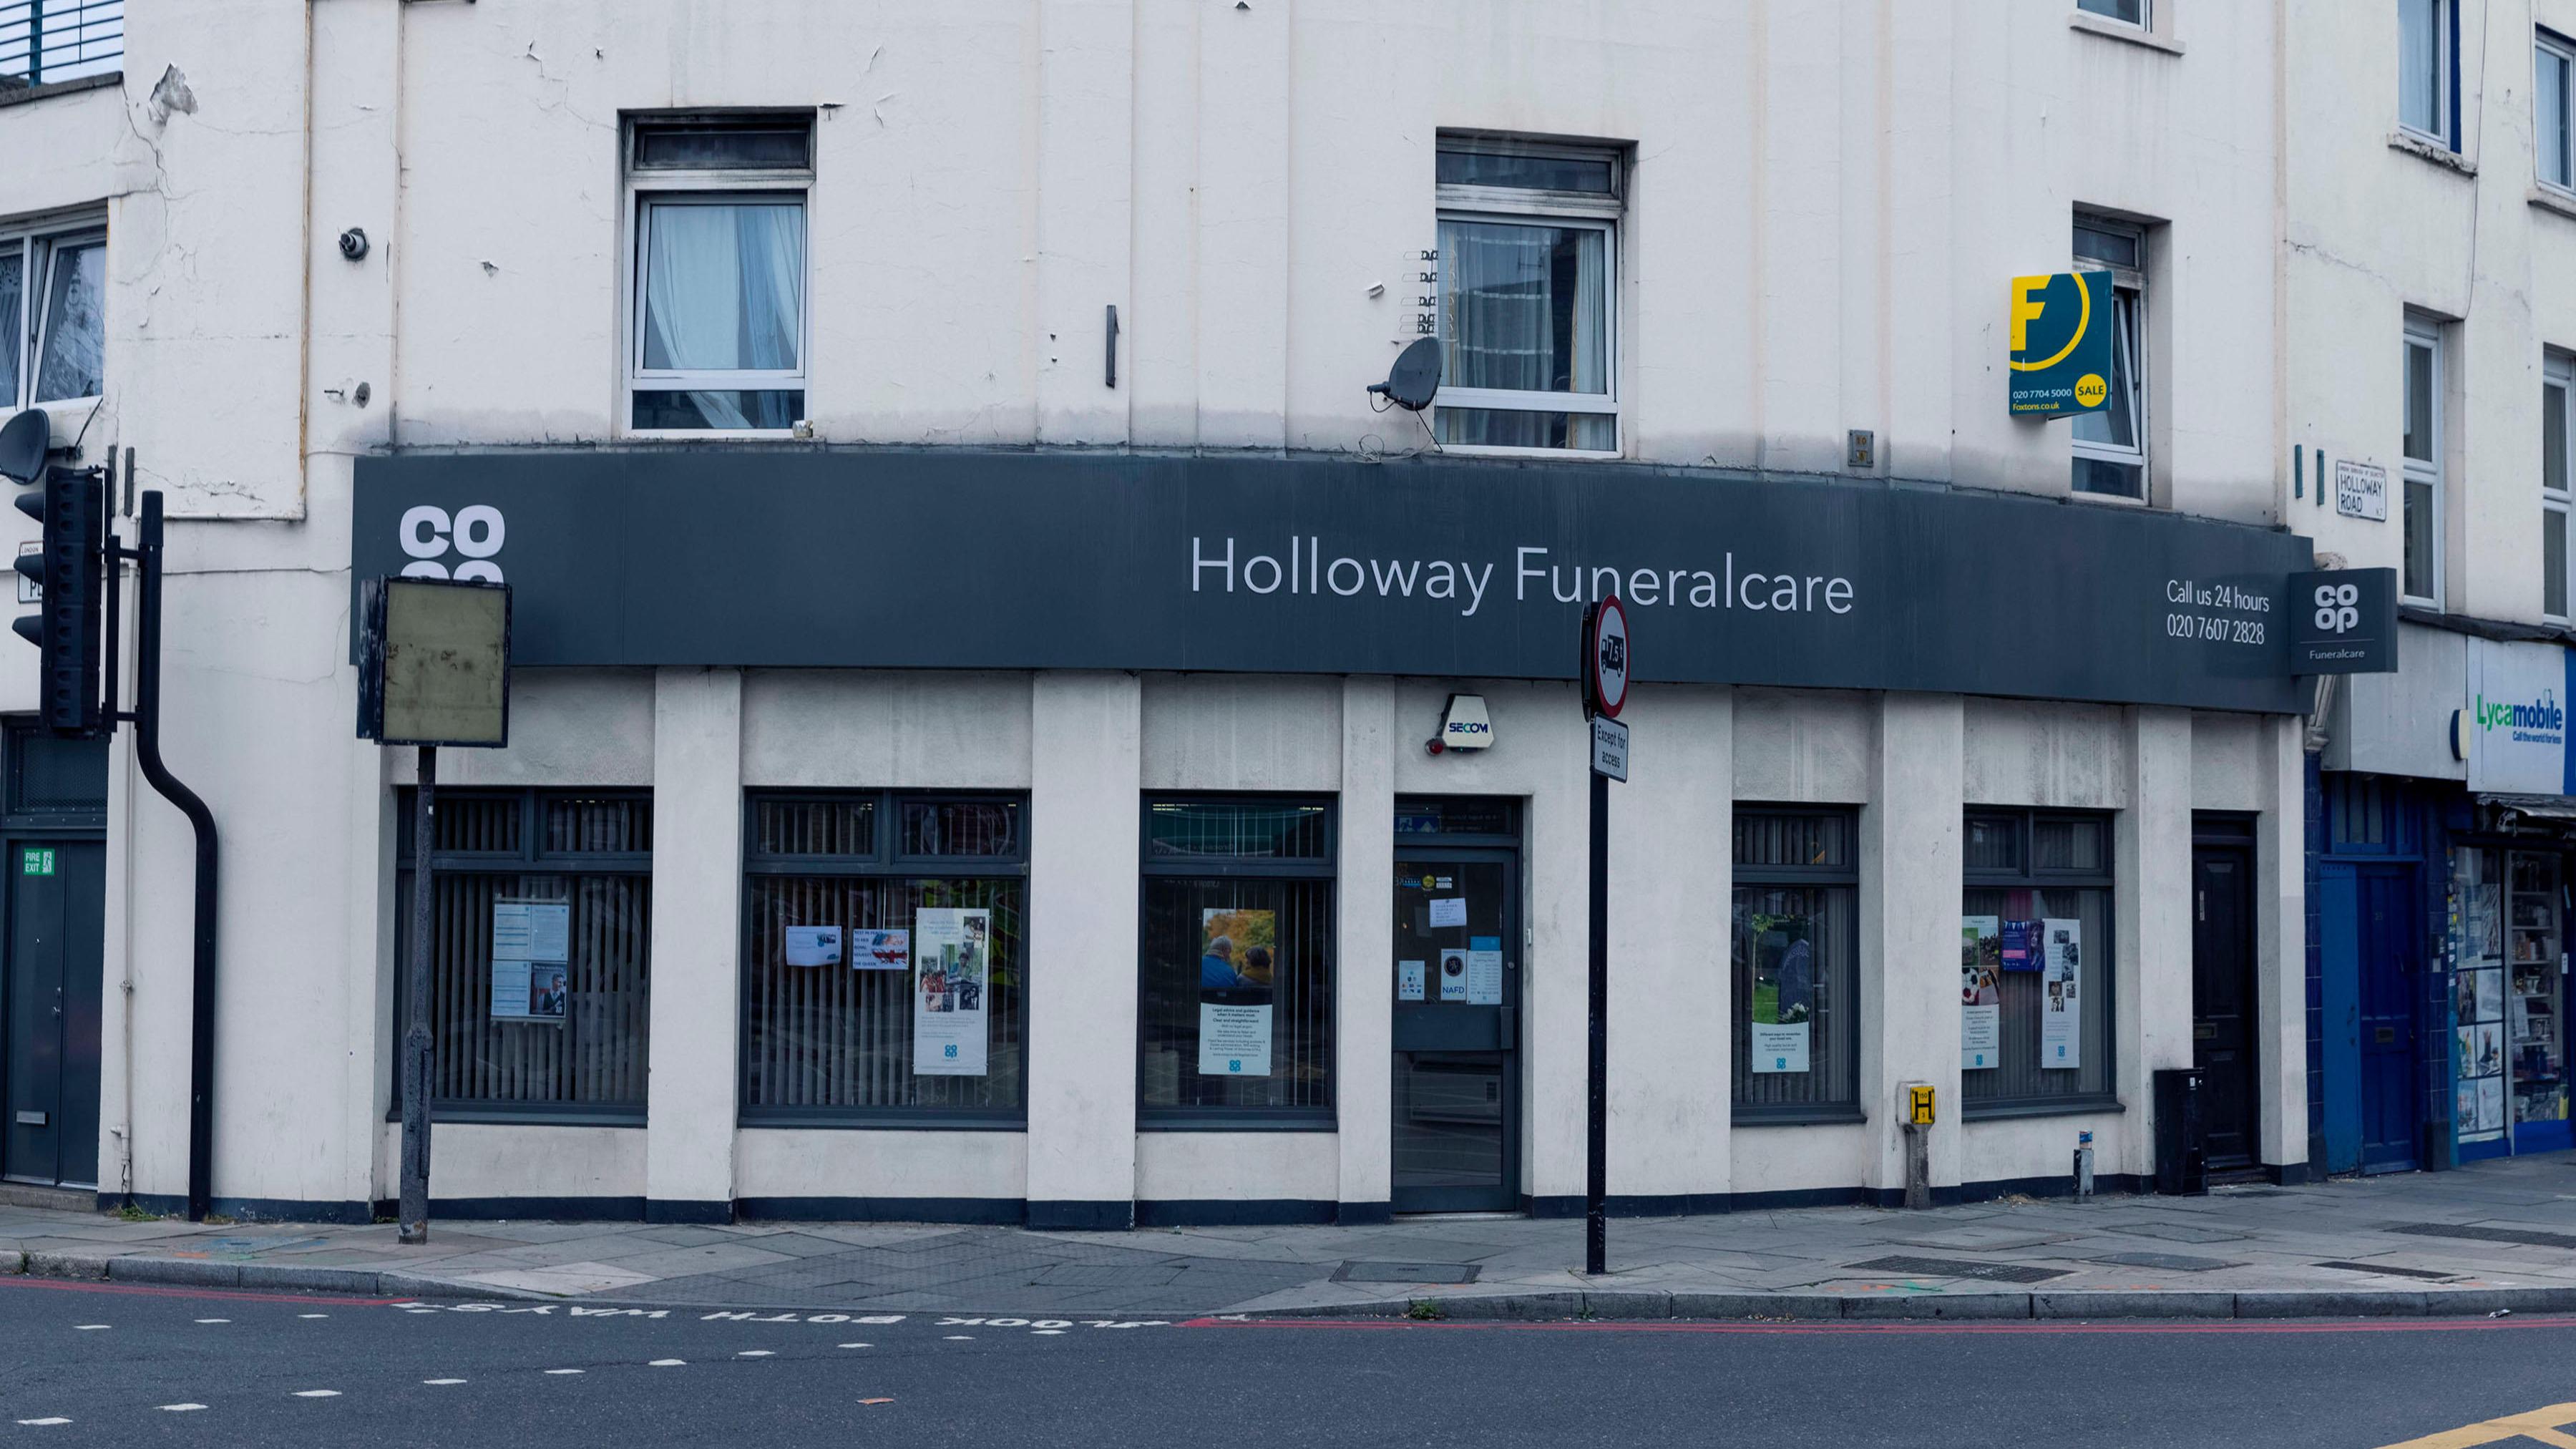 Images Holloway Funeralcare